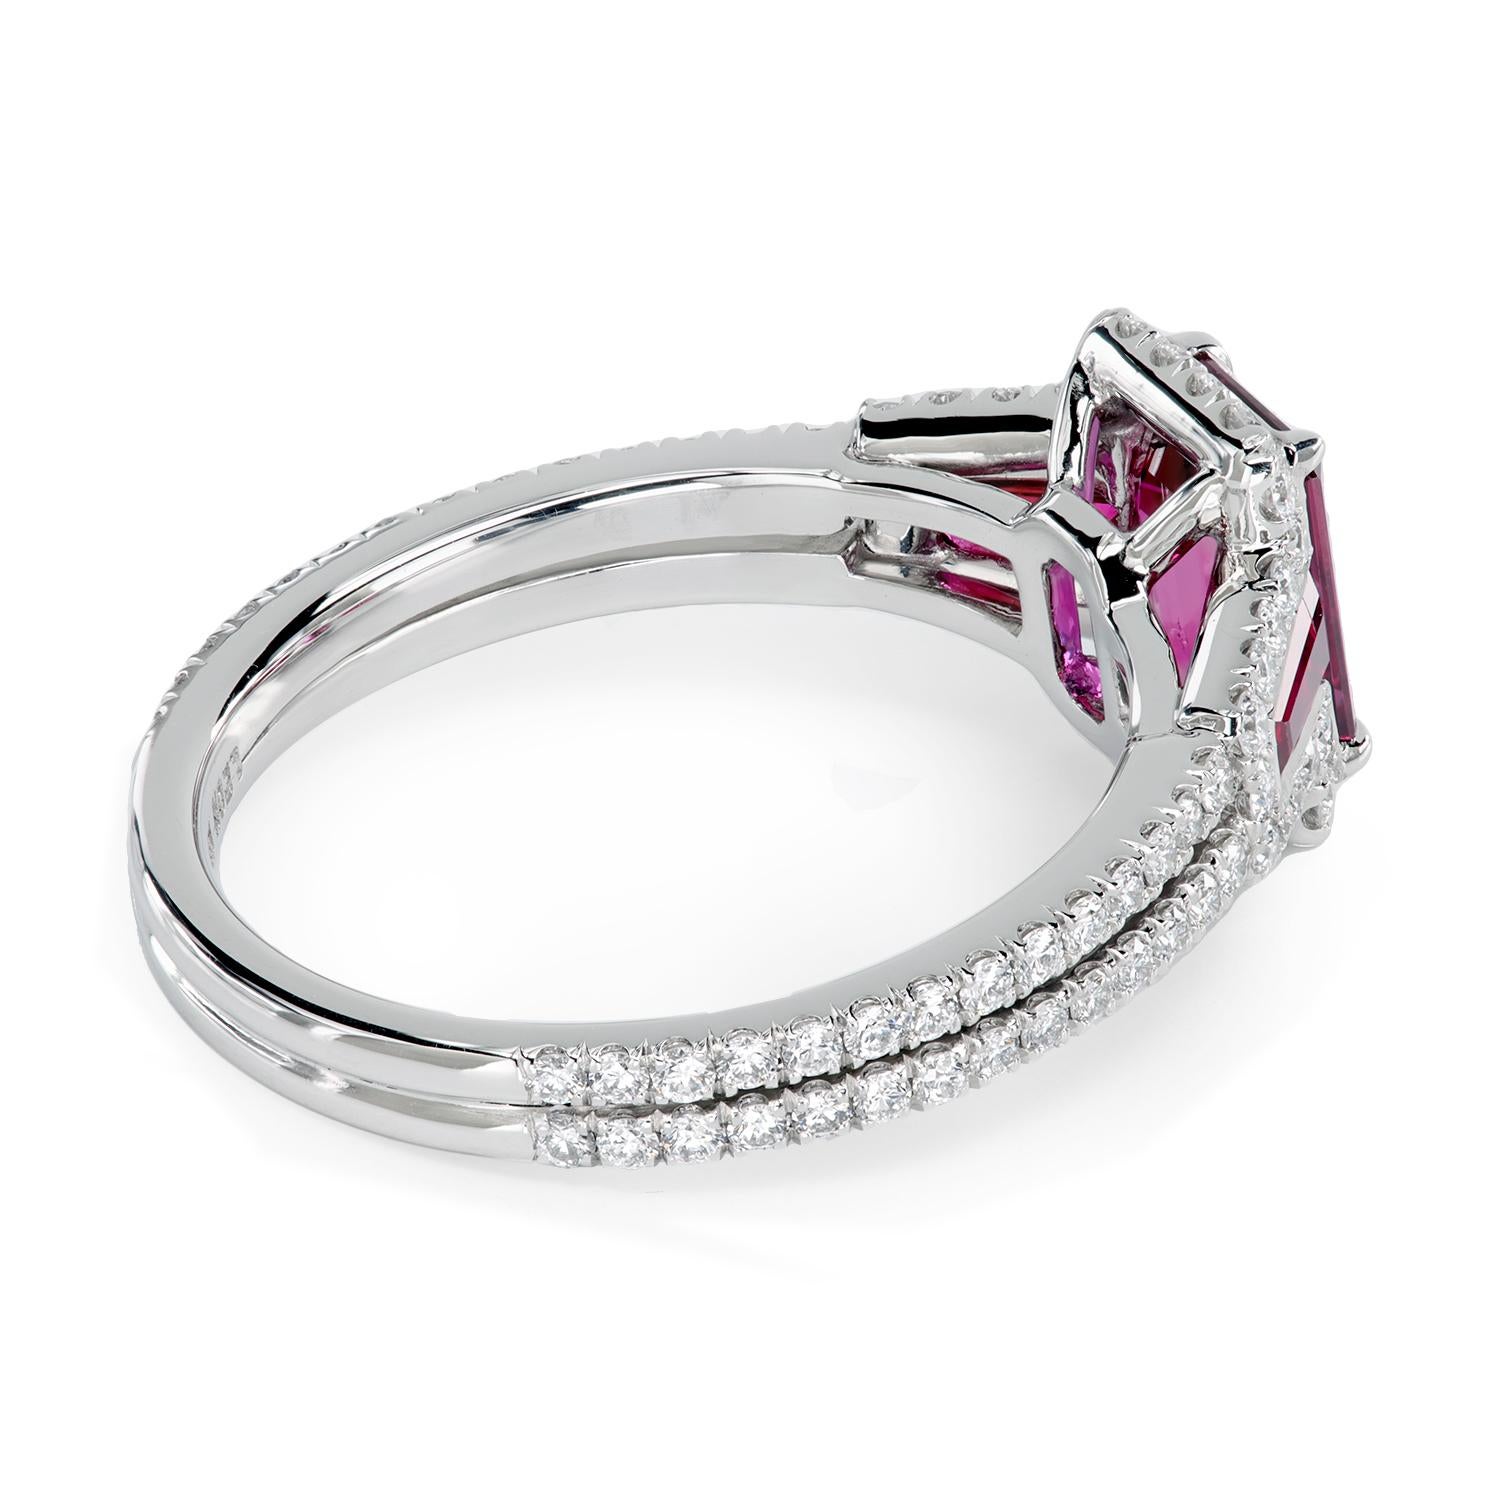 Emerald Cut Leon Mege Micro Pave Platinum Ring with Certified 1.06 Ct Emerald-Cut Ruby For Sale